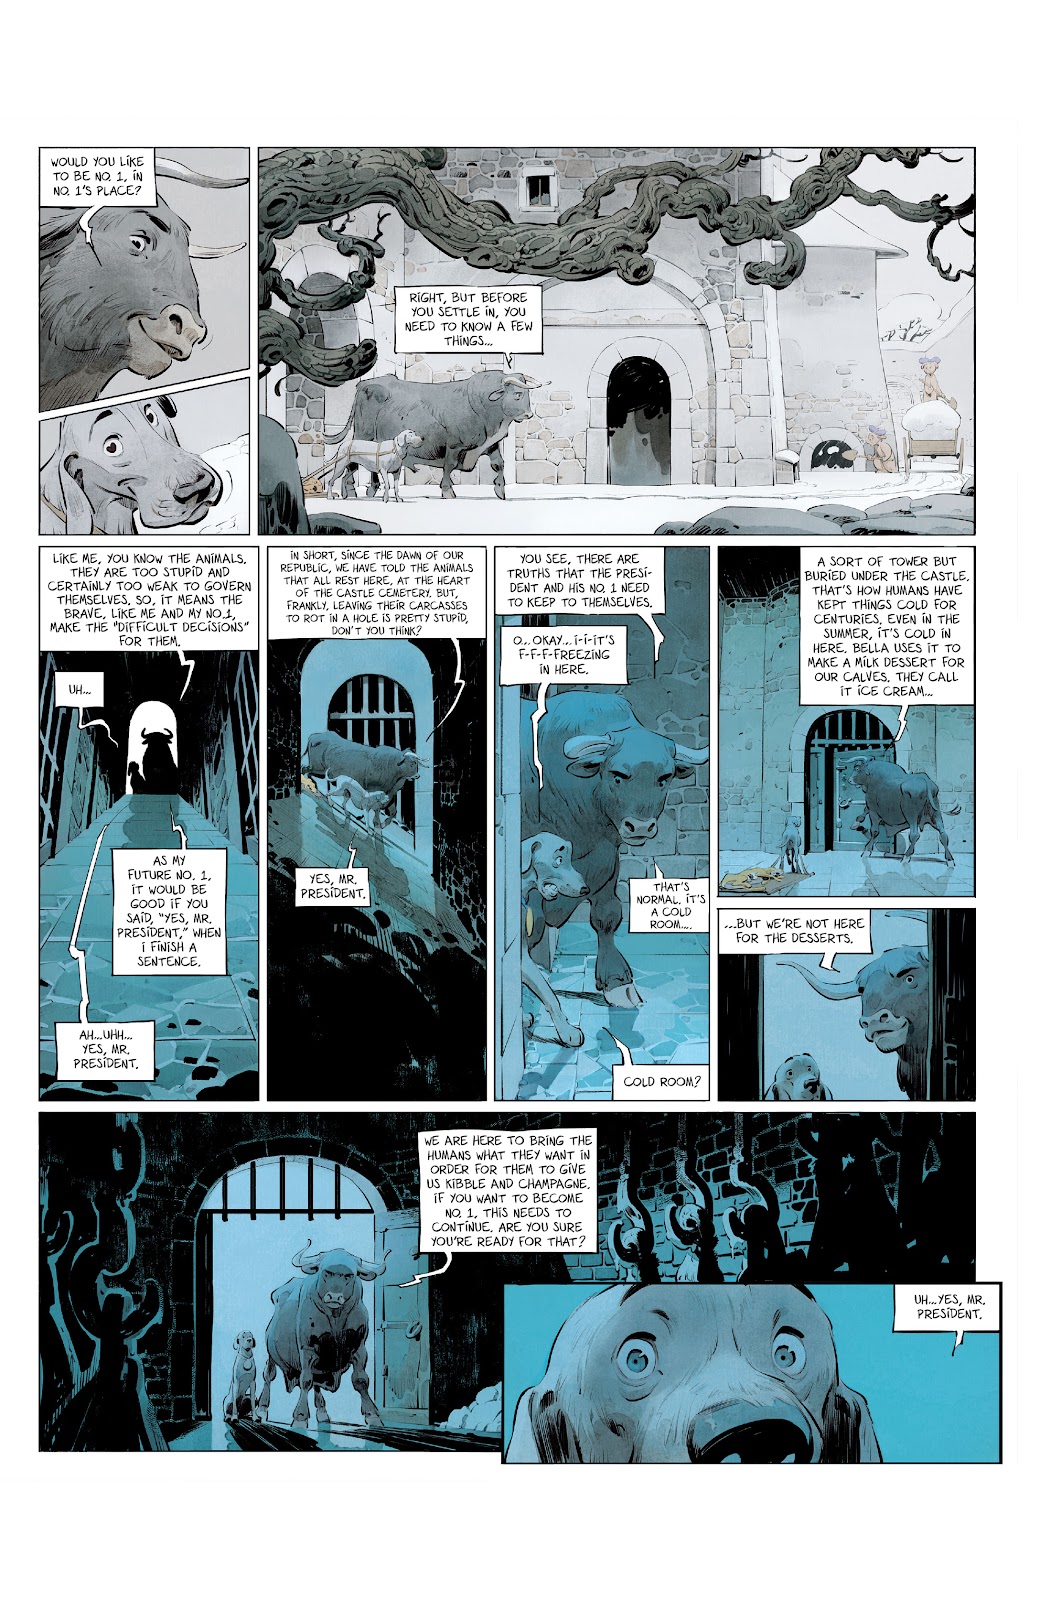 Animal Castle Vol. 2 issue 1 - Page 8